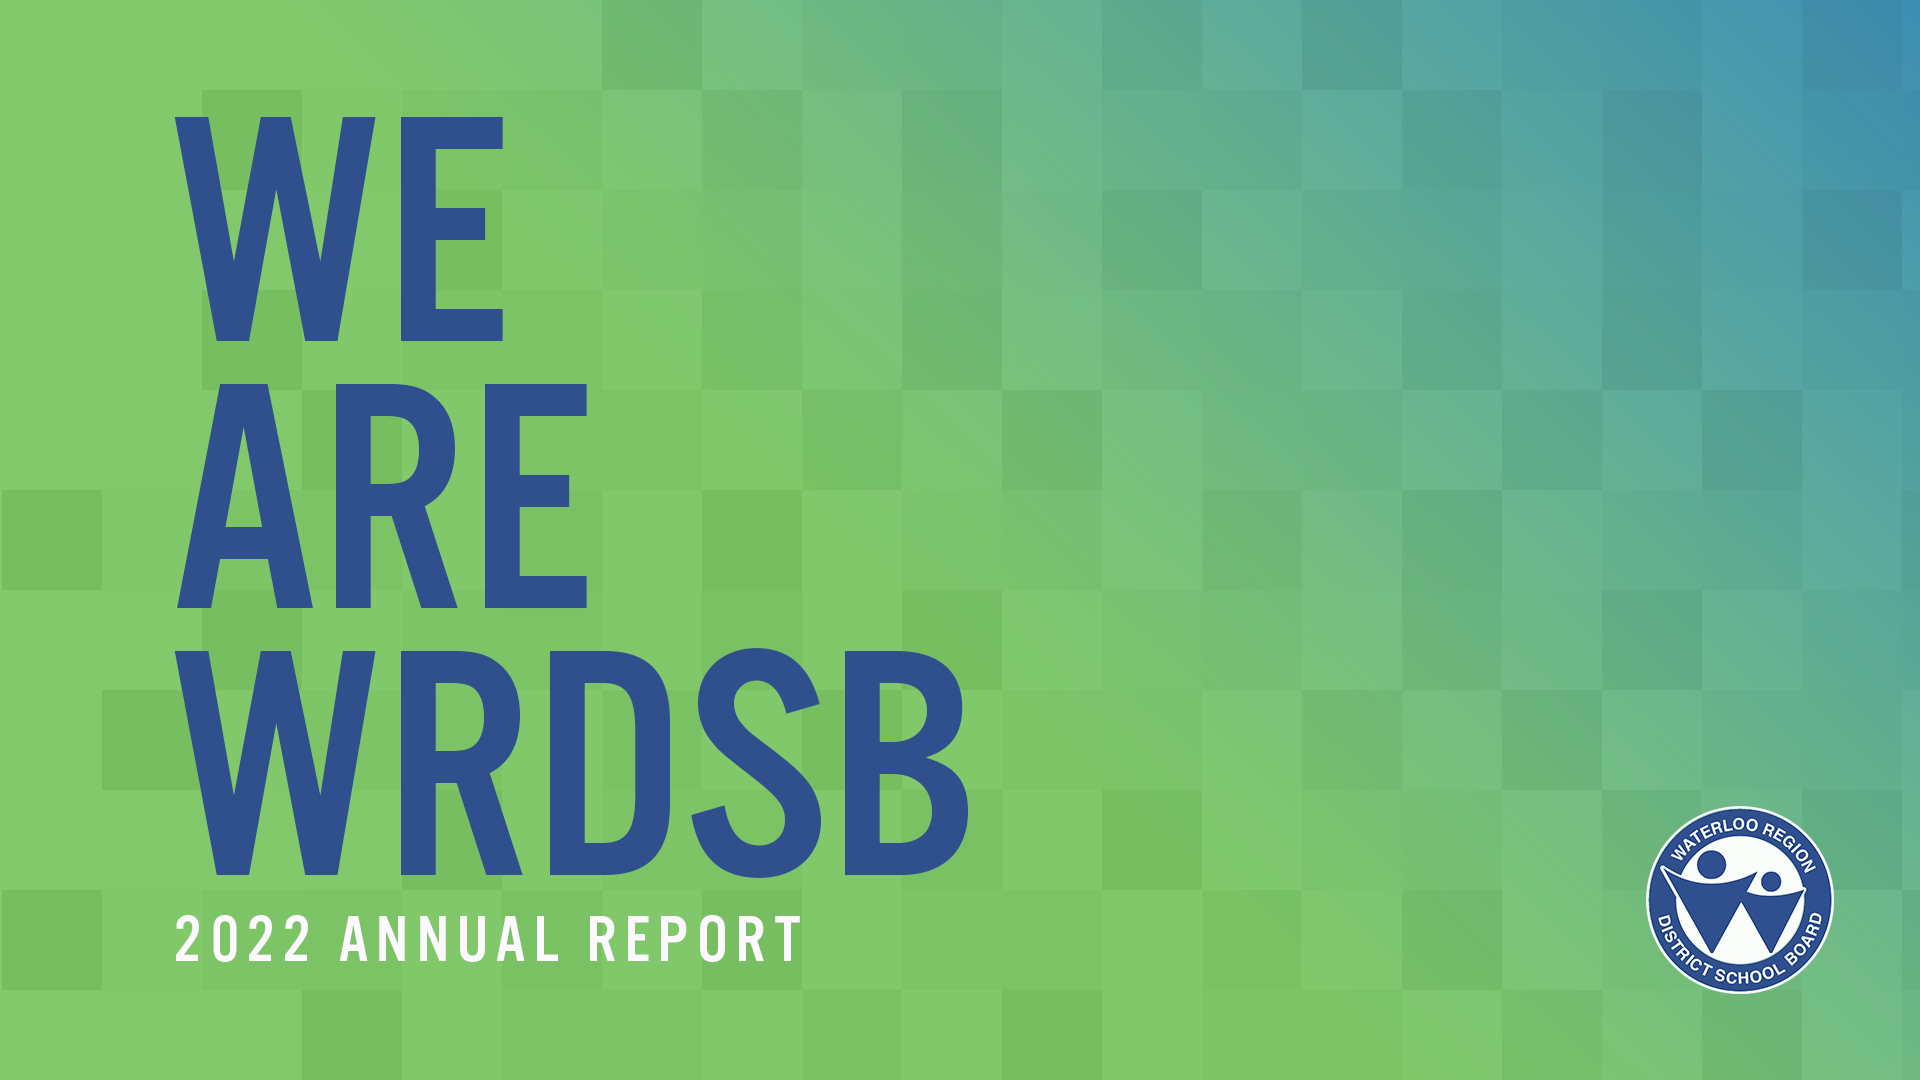 We Are WRDSB 2022 Annual Report